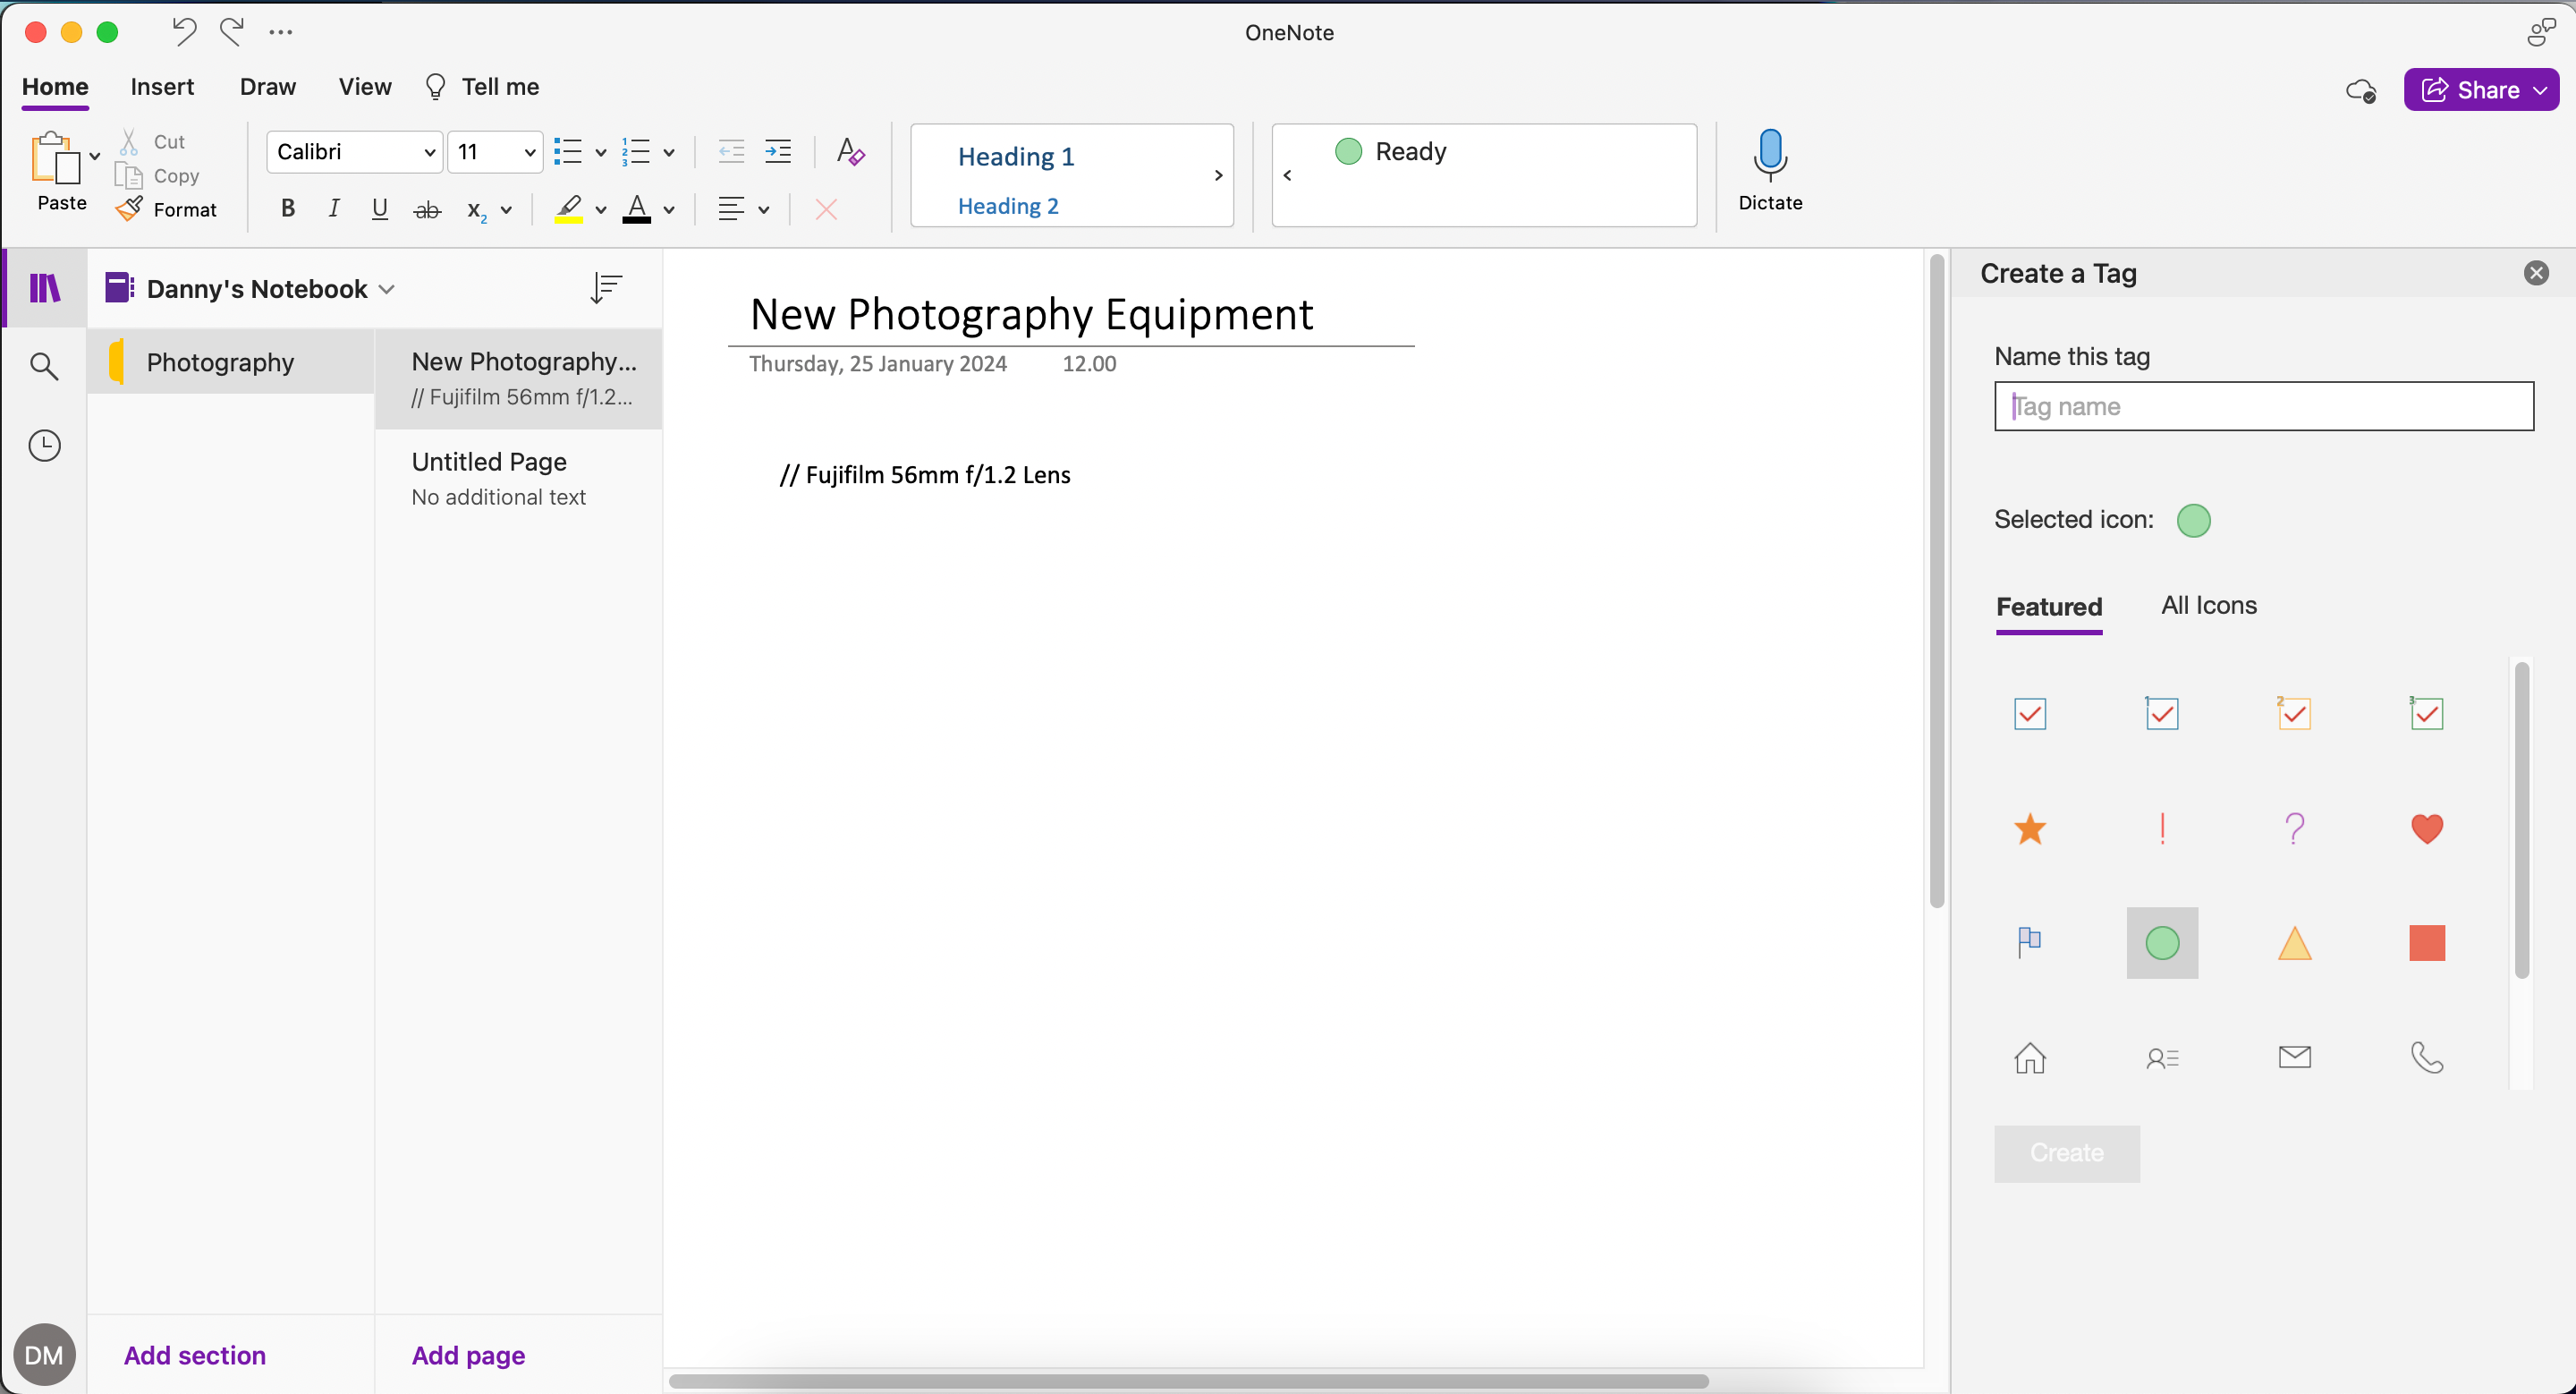 Created tab appearing in OneNote